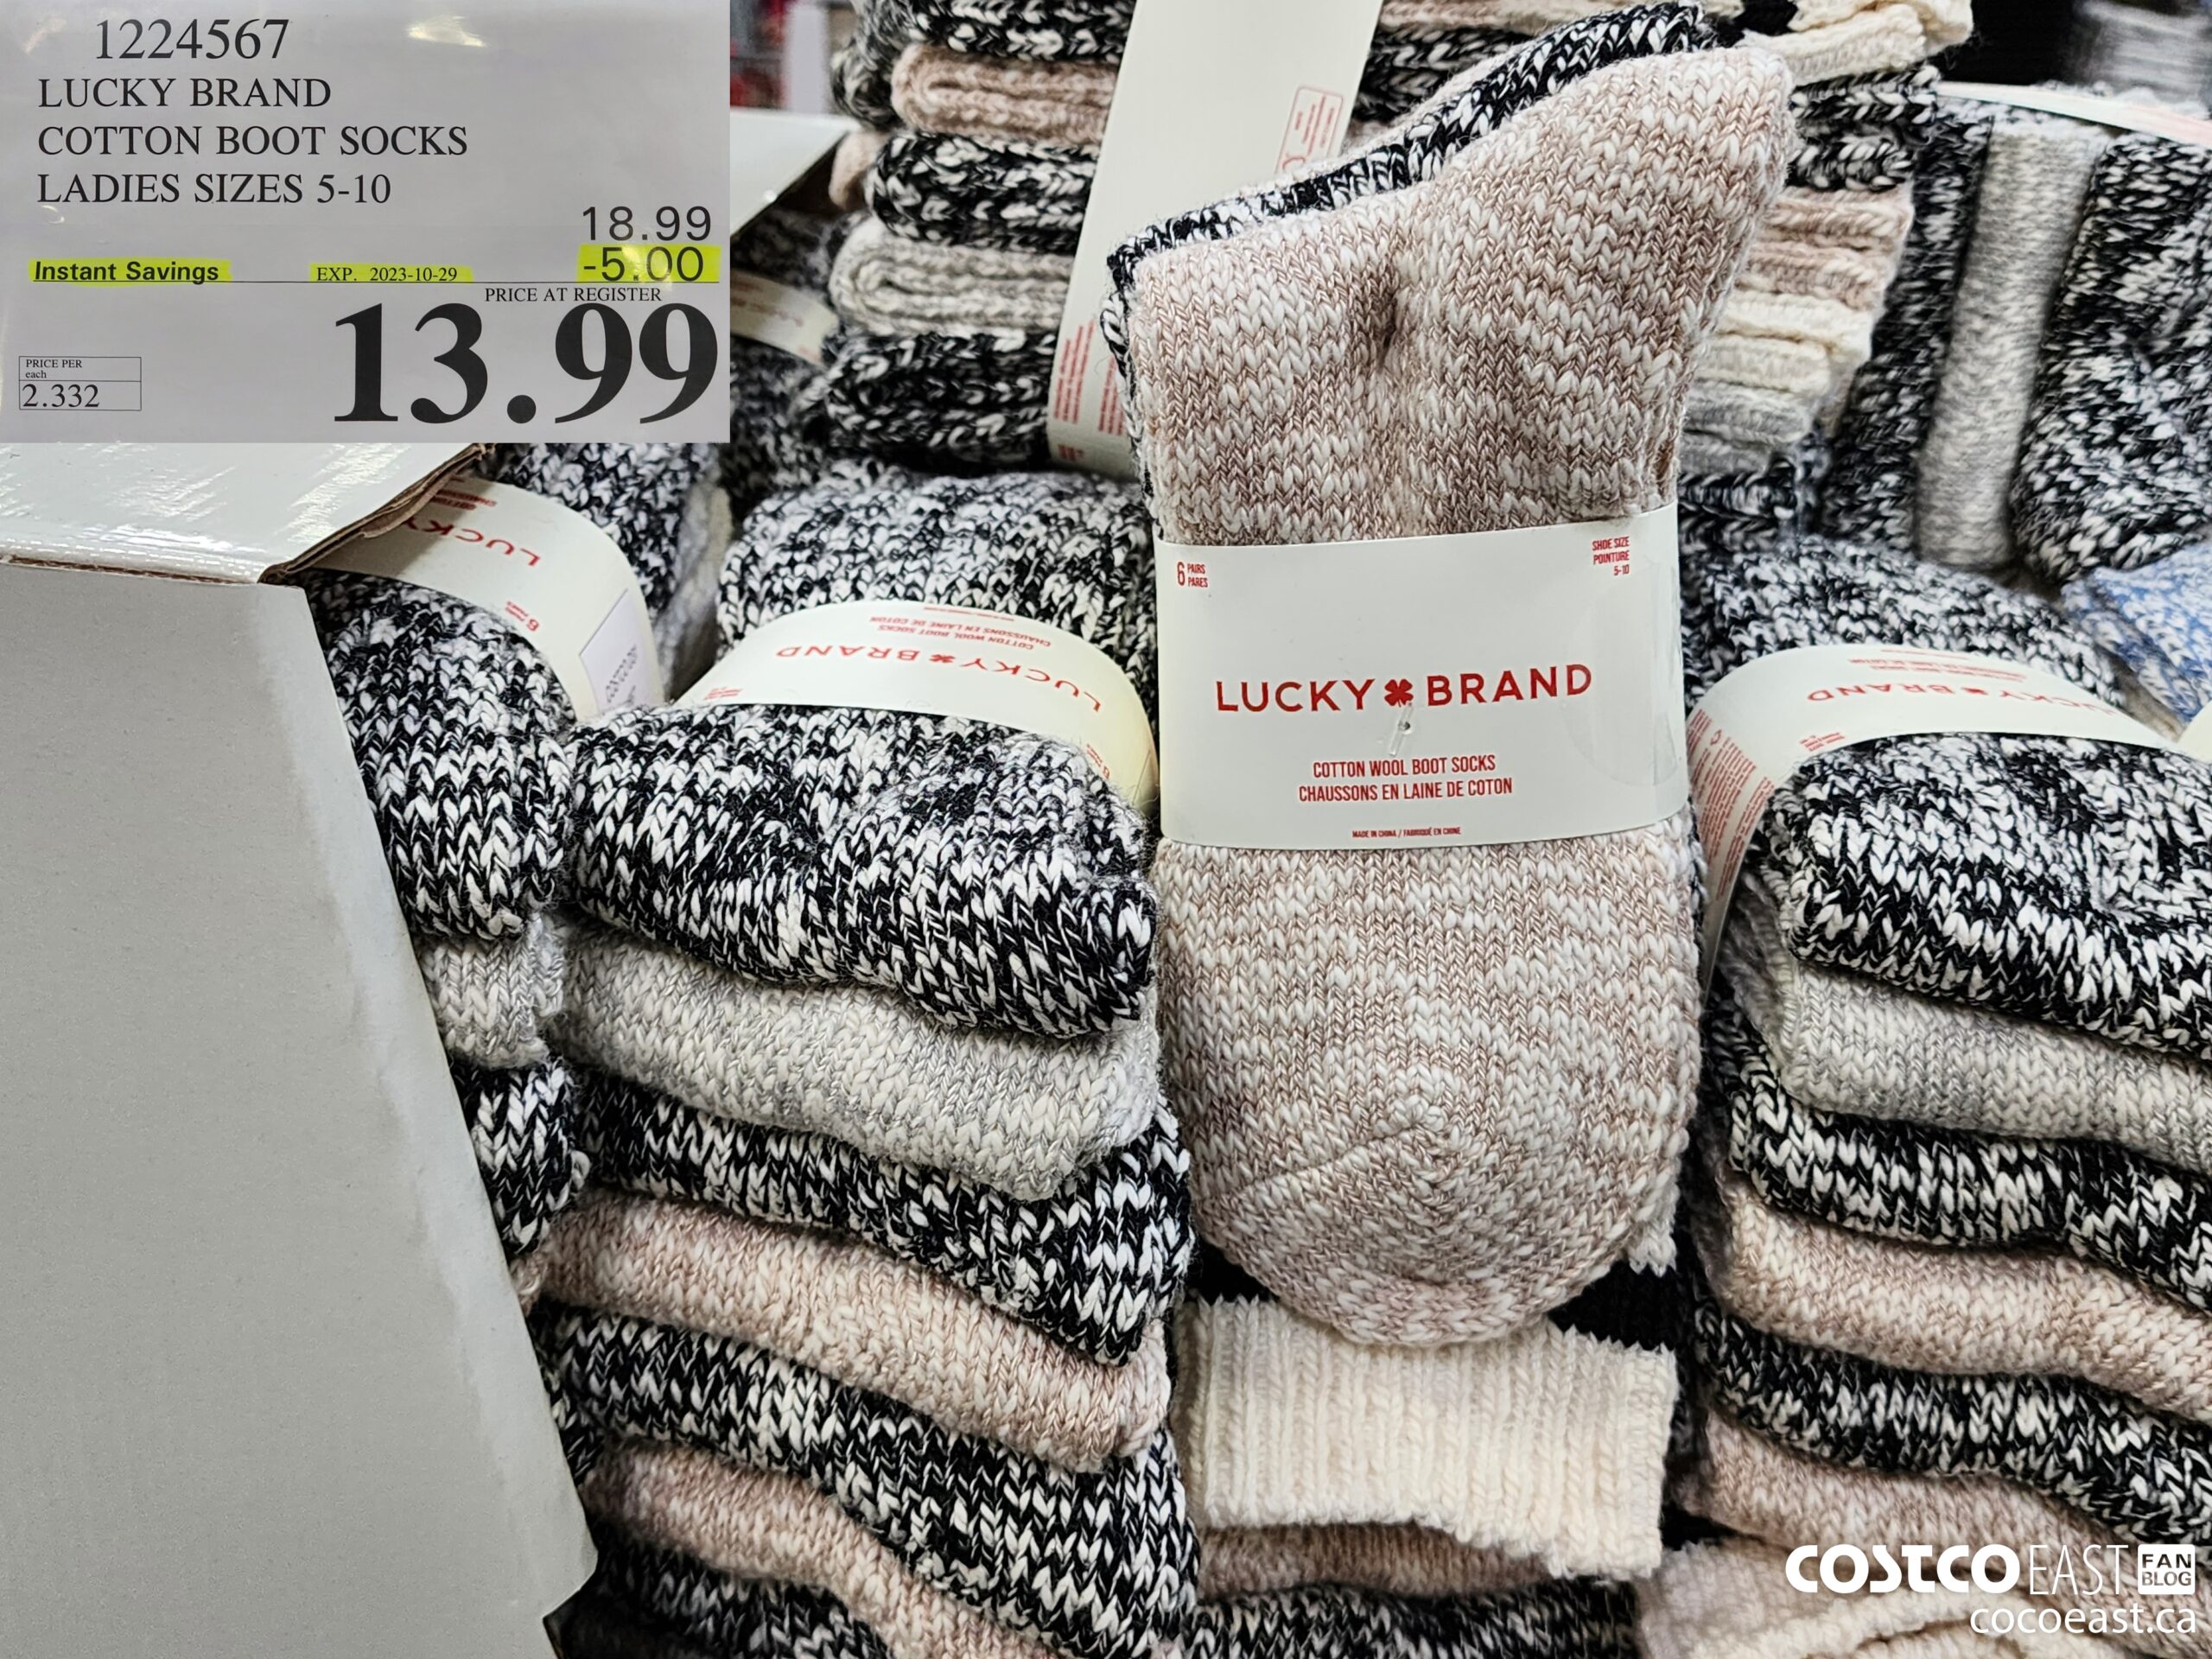 1224567 LUCKY BRAND COTTON BOOT SOCK LADIES SIZES 5 10 5 00 INSTANT SAVINGS  EXPIRES ON 2023 10 29 13 99 - Costco East Fan Blog